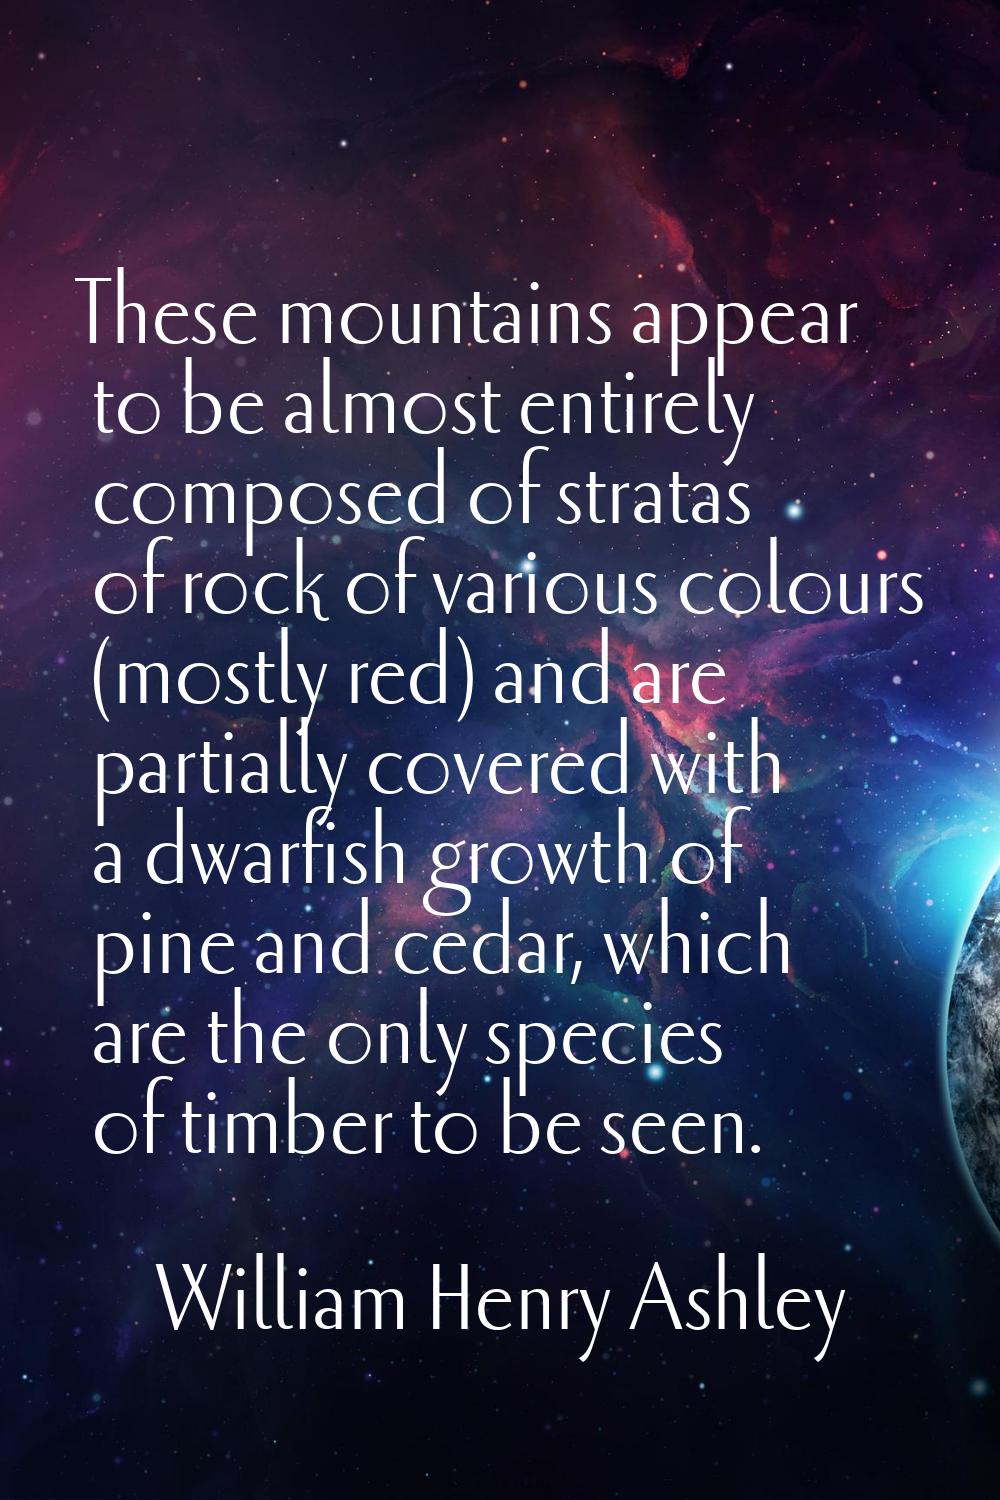 These mountains appear to be almost entirely composed of stratas of rock of various colours (mostly